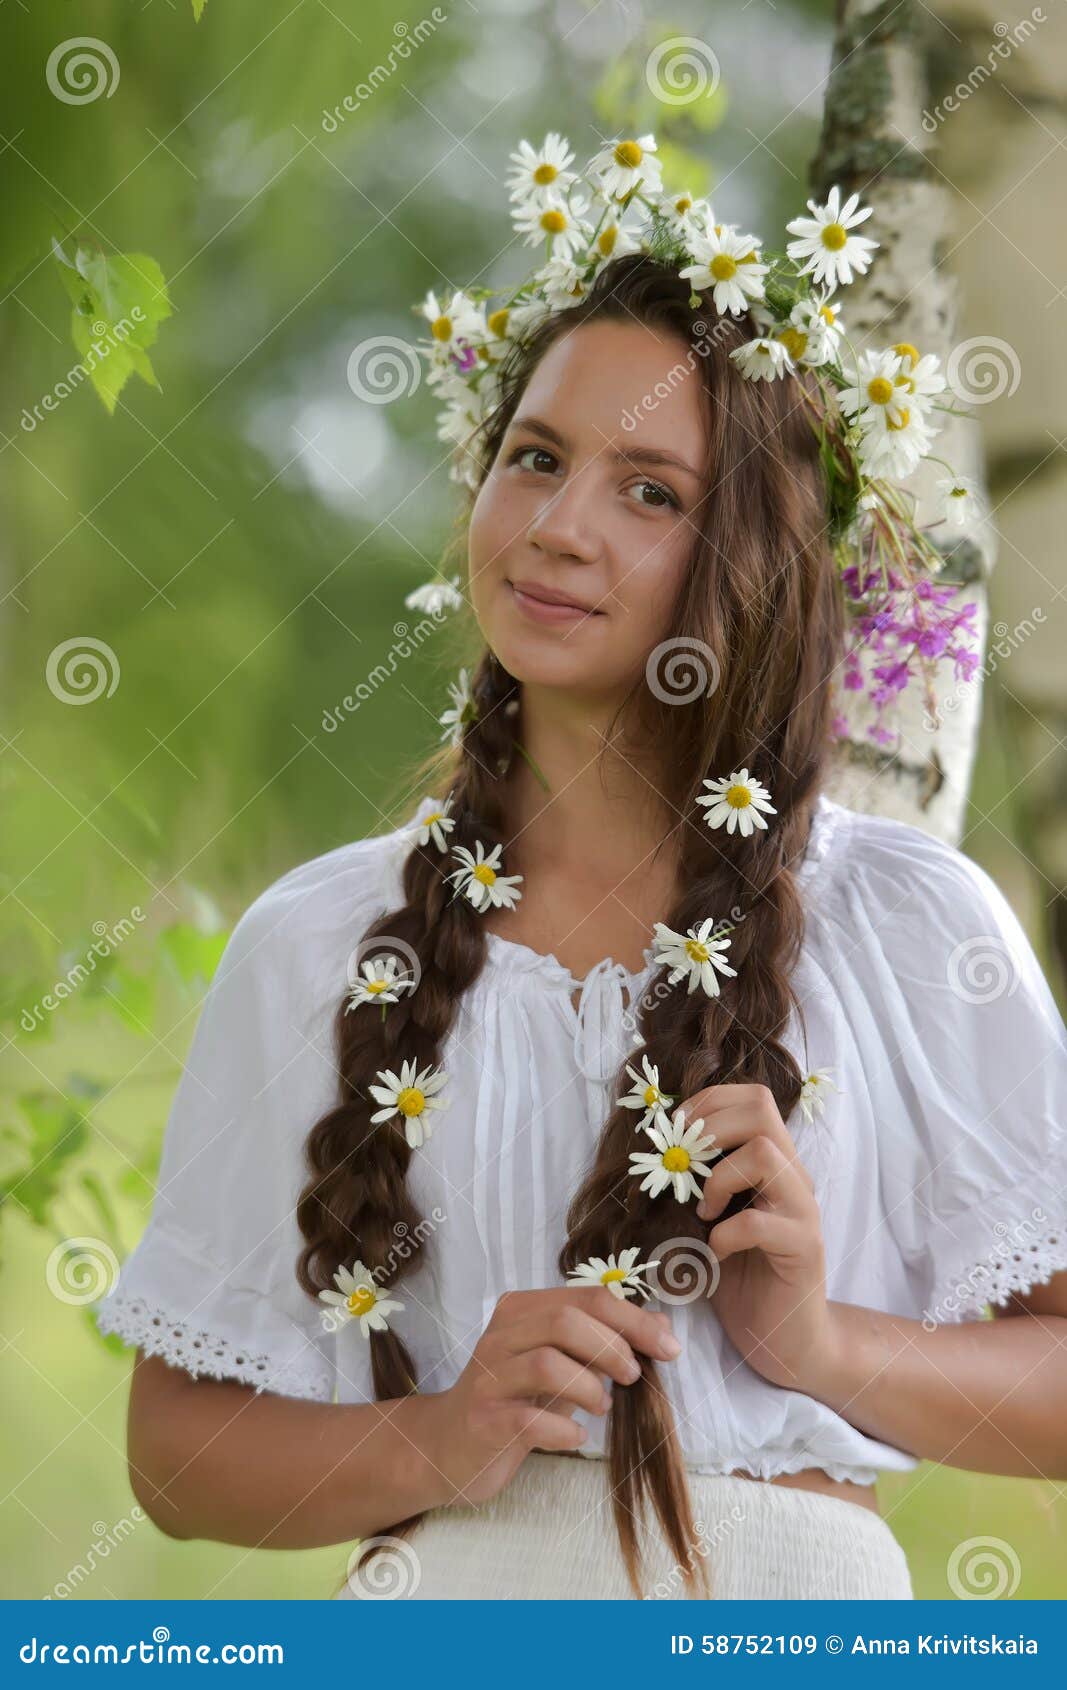 Dark-haired Girl with Braids and Daisies Stock Image - Image of collect ...